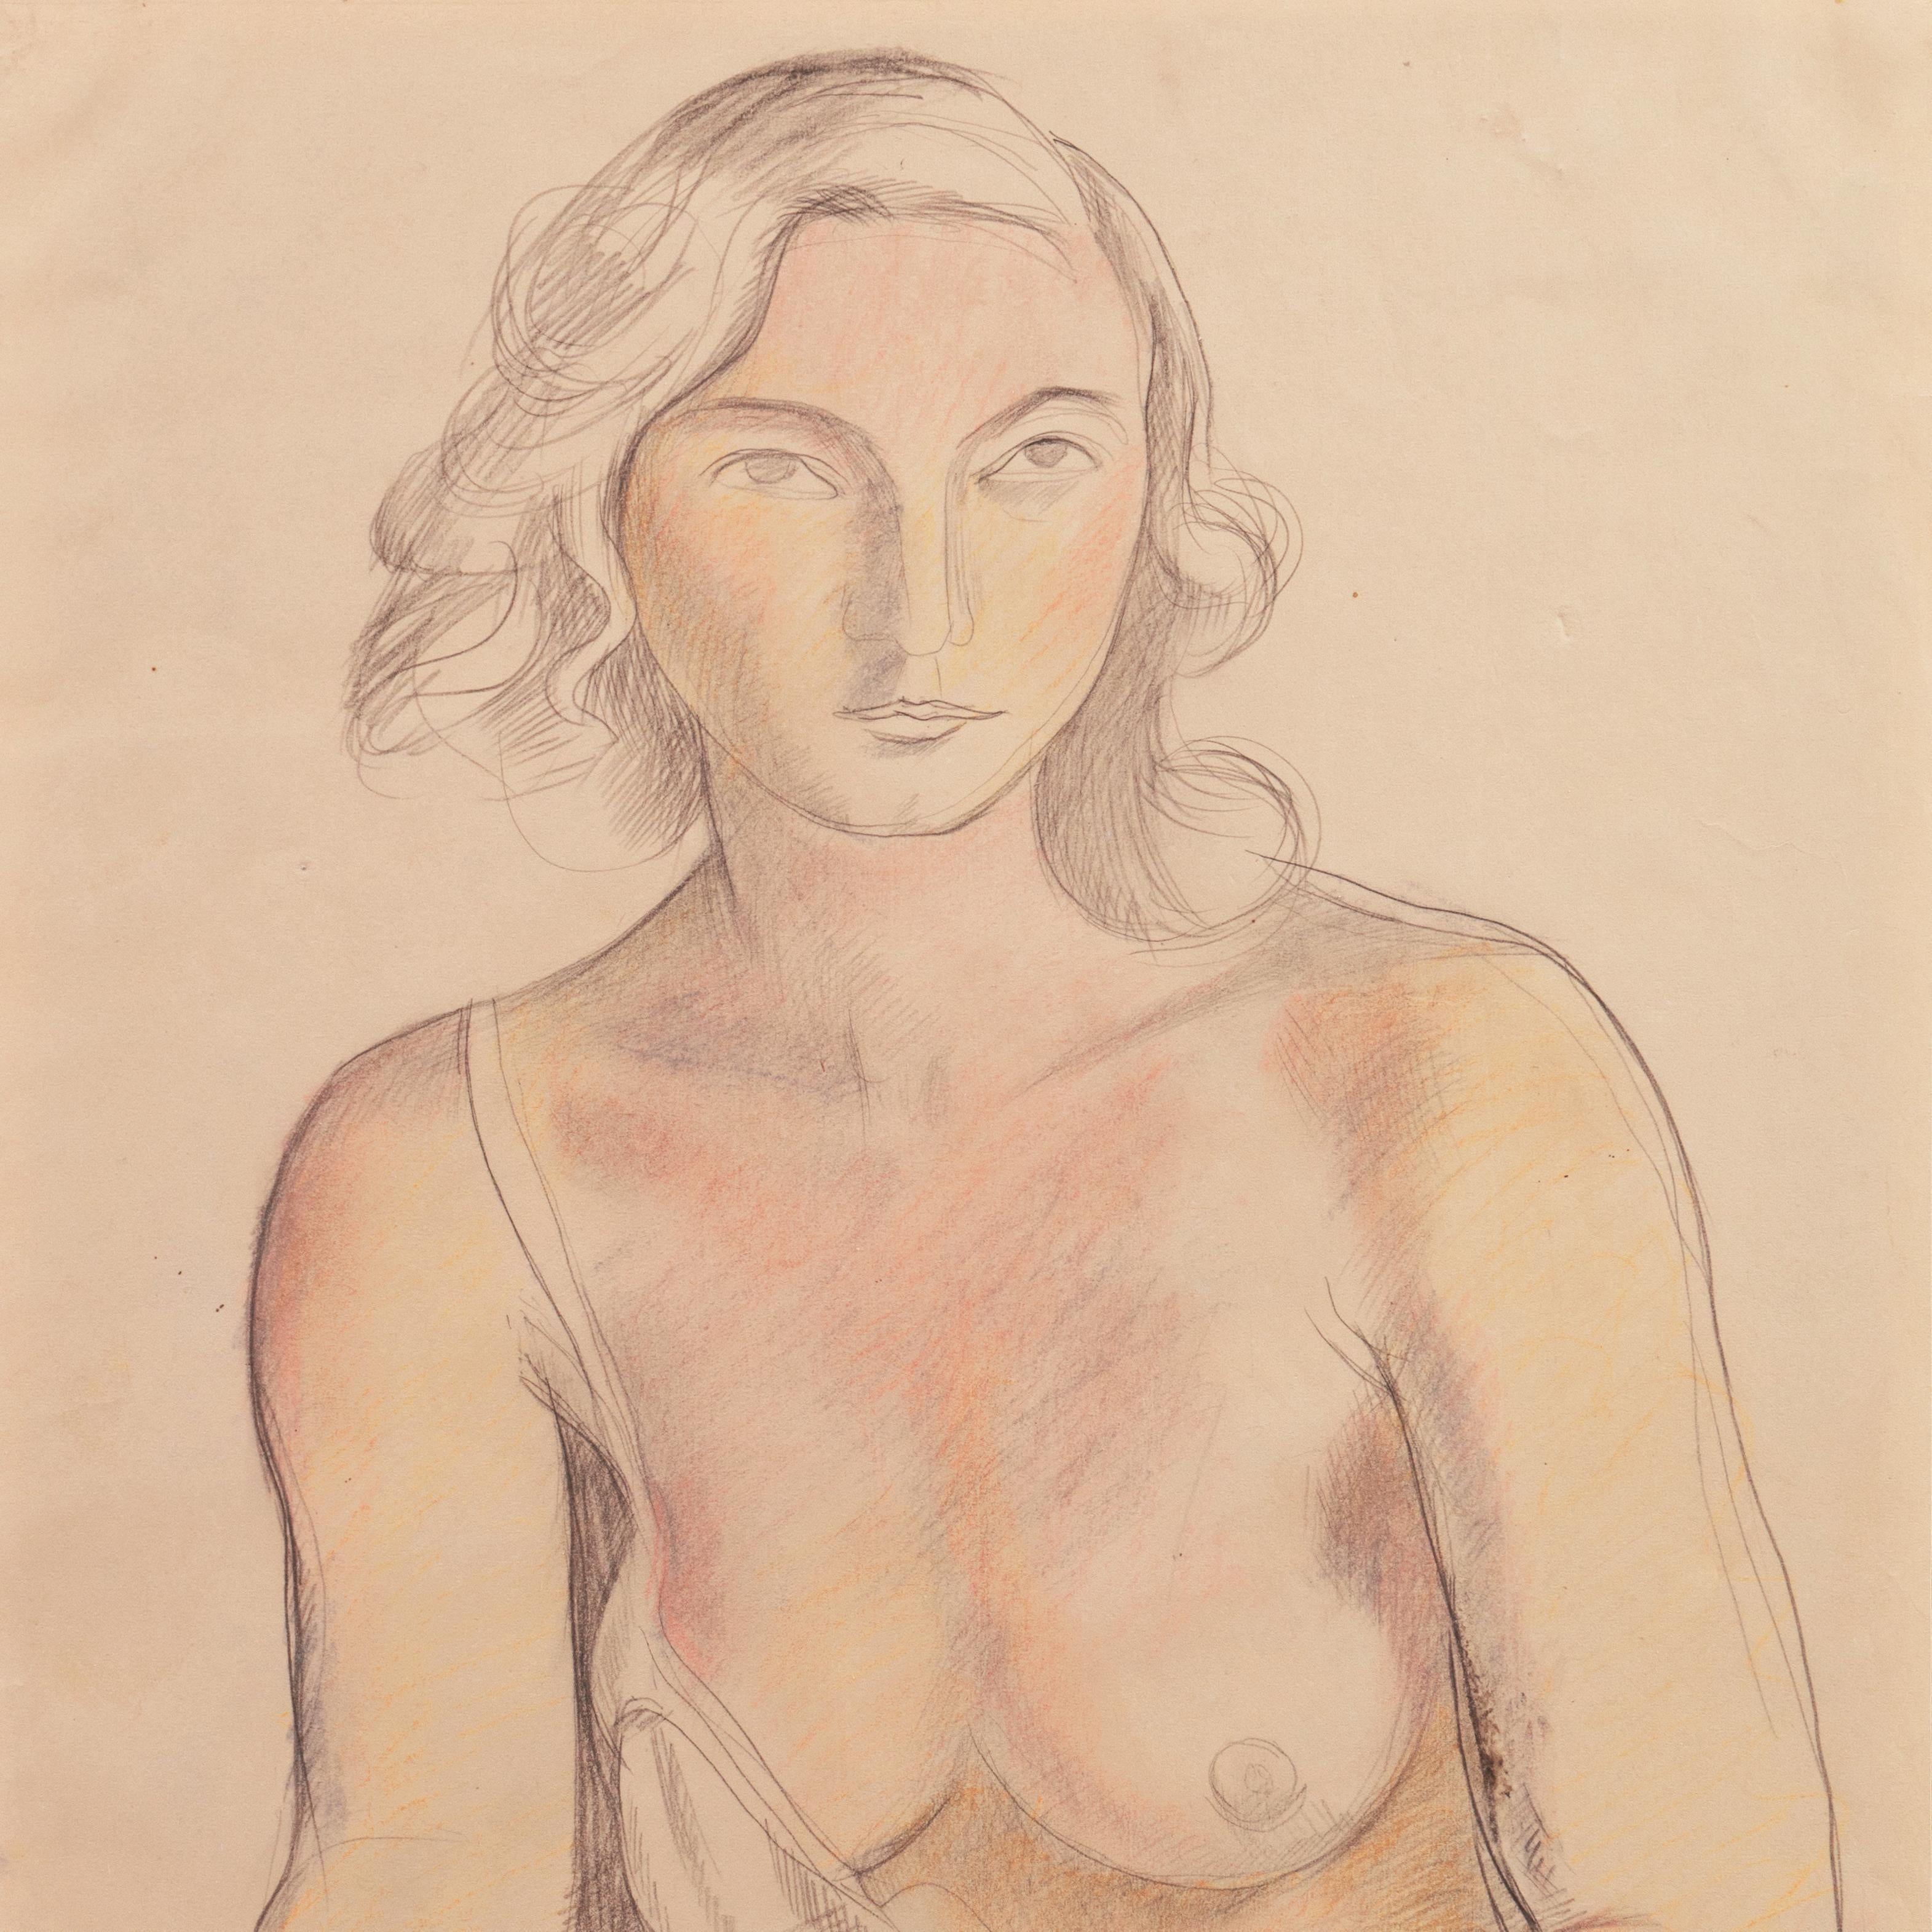 Signed lower right, 'Stackpole' for Ralph Ward Stackpole (American, 1885-1973) and created circa 1930.

An elegant and psychologically penetrating study of a young woman, shown seated and partially draped.

Born in Oregon, Stackpole moved to San